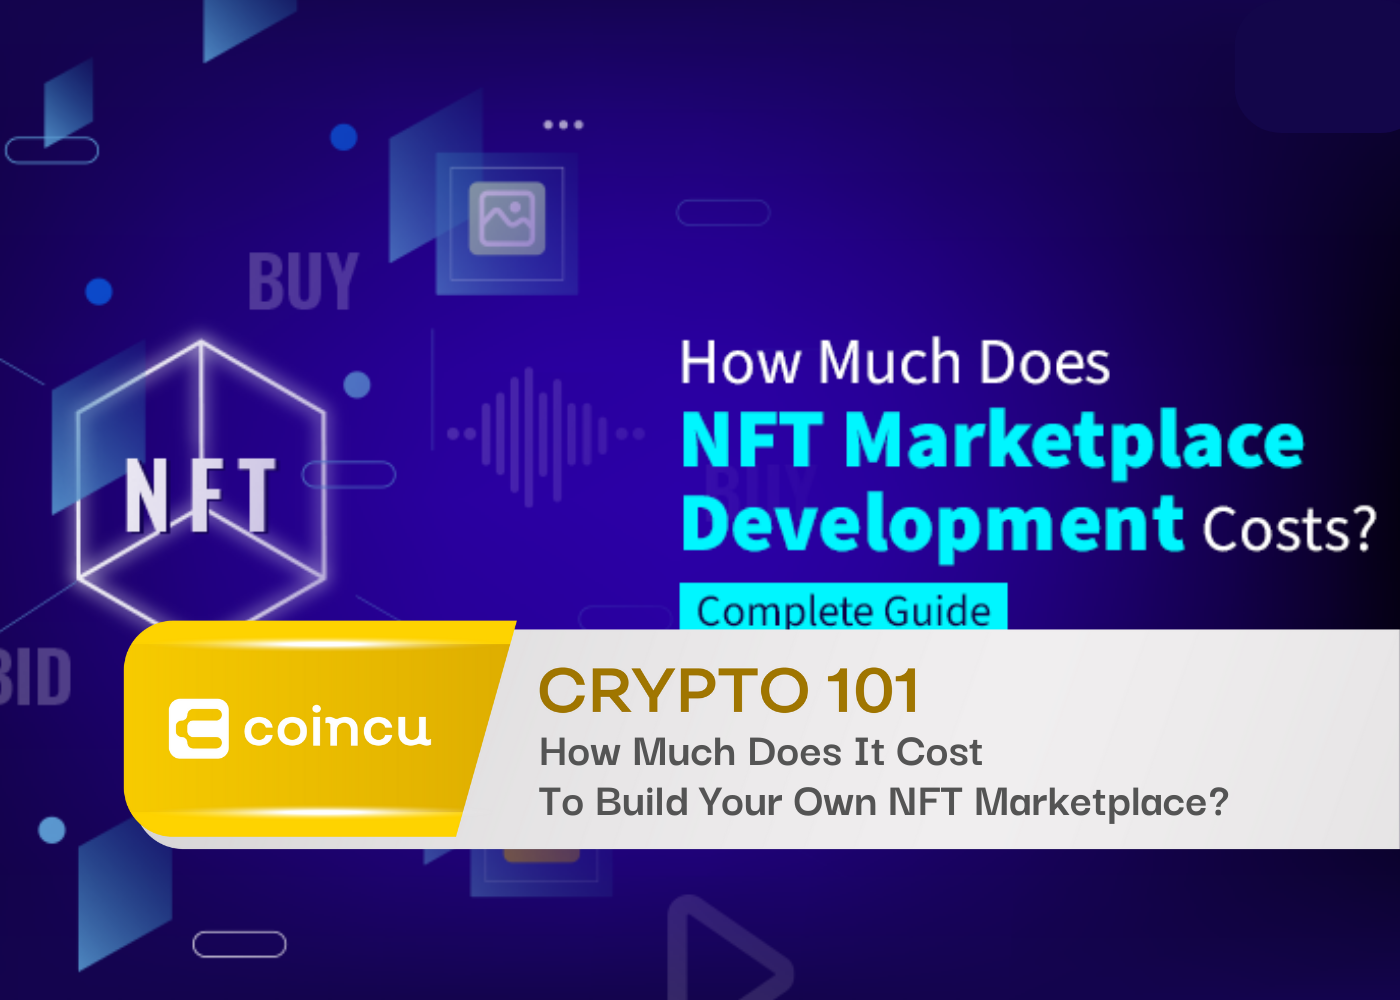 Crypto 101: How Much Does It Cost To Build Your Own NFT Marketplace?